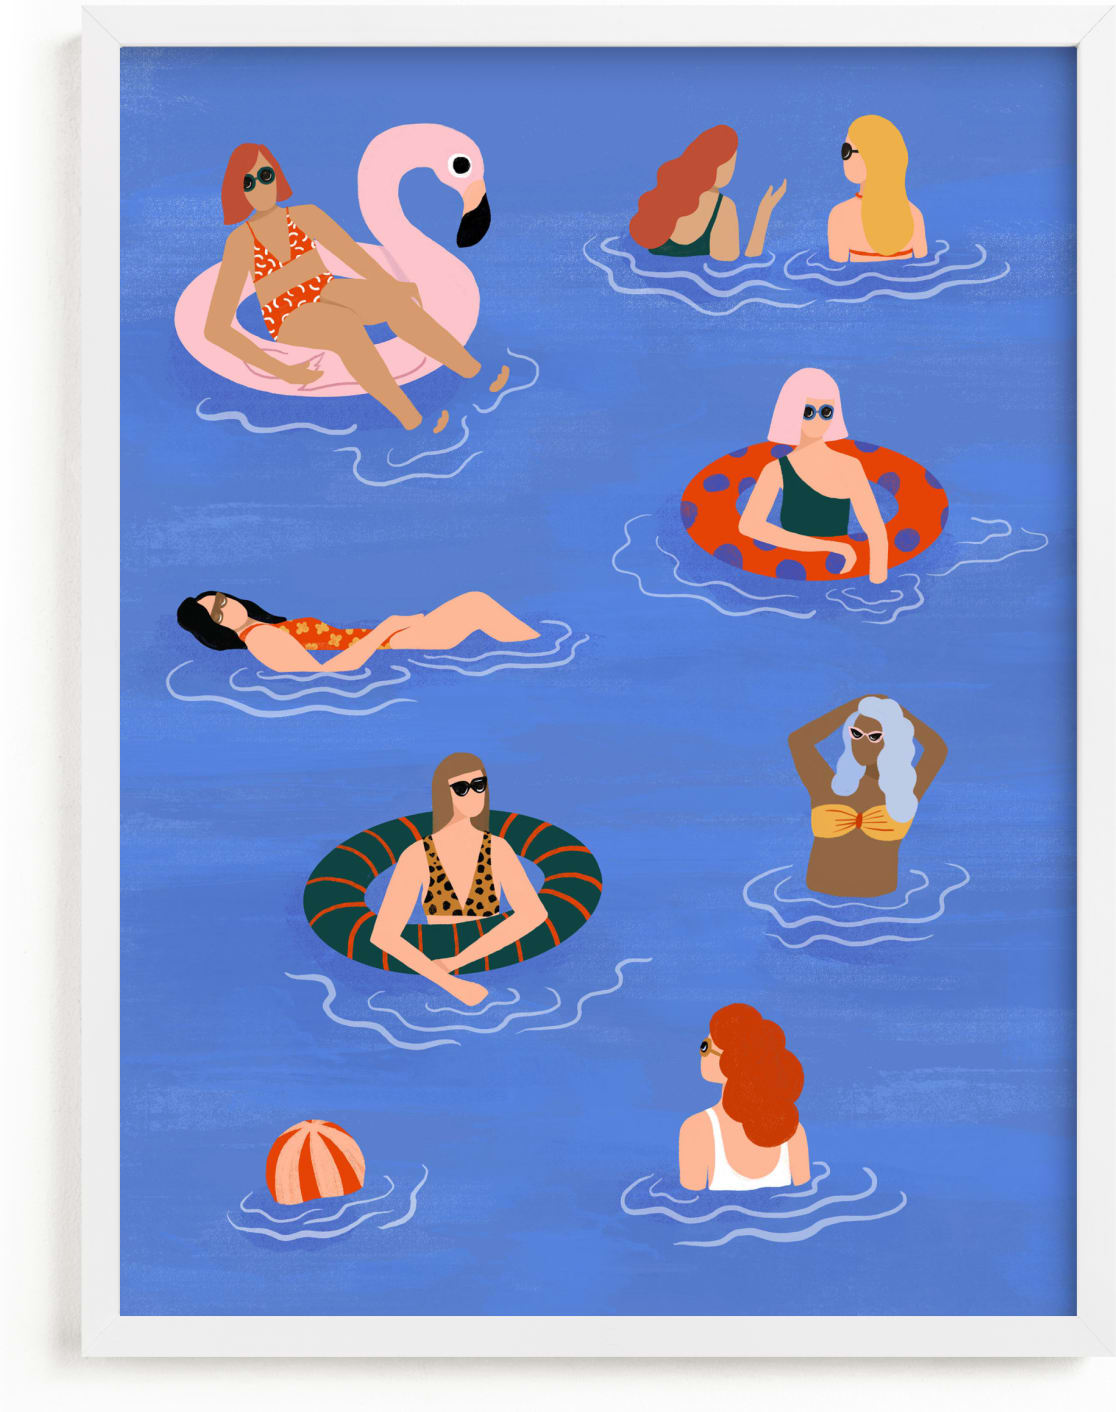 This is a blue kids wall art by Pati Cascino called Pool Party.